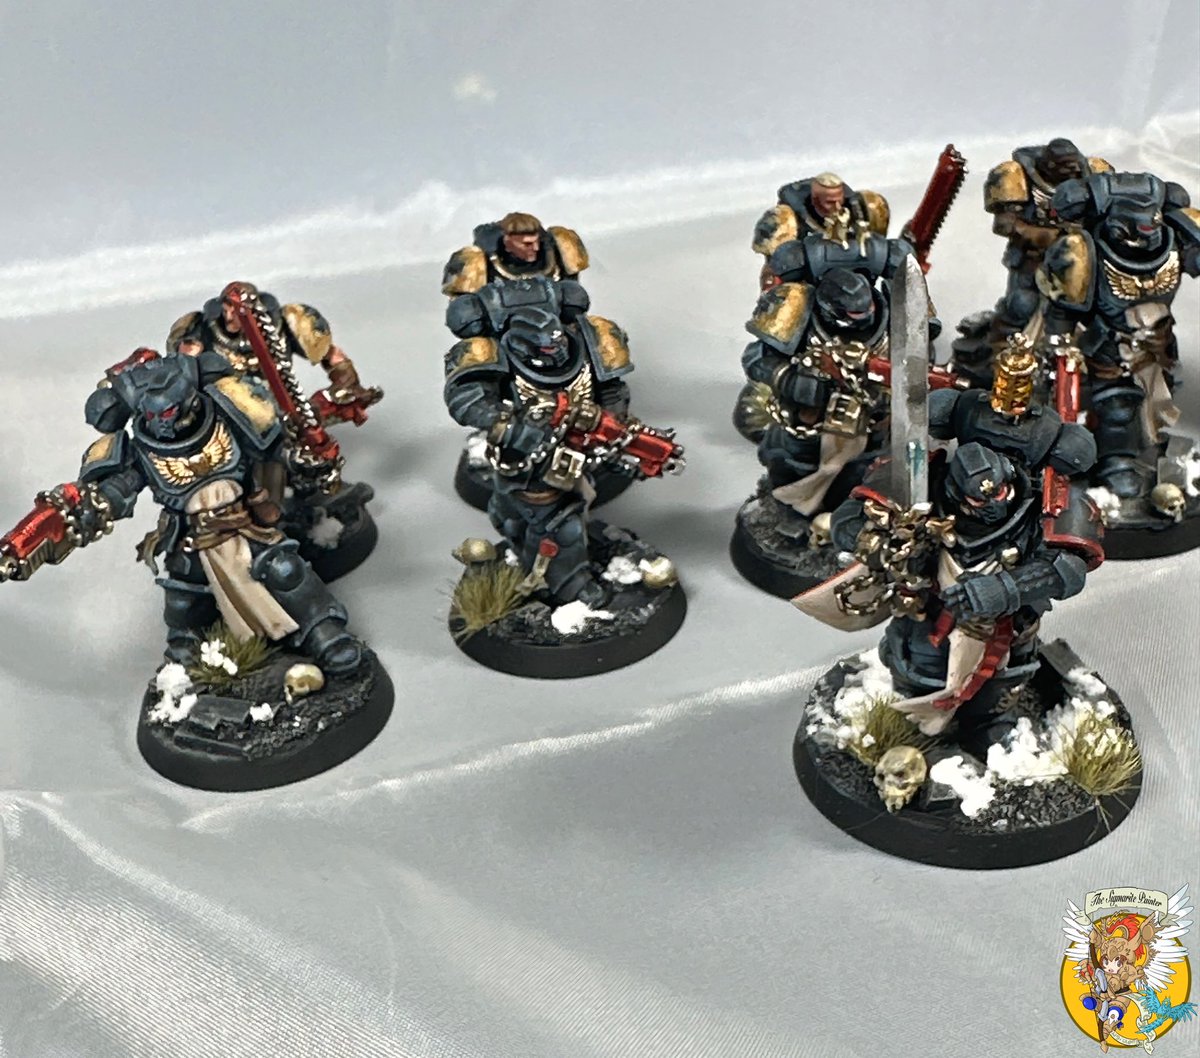 Here are an few group pictures of my first #PrimarisCrusaderSquad for the #SpaceMarines of the #BlackTemplars in #Warhammer40K. #WarhammerCommunity #PaintingWarhanmer #TheEternalCrusade #TheEternalCrusaders #EternalCrusade #PaintingWarhammer40K #warhammer40000